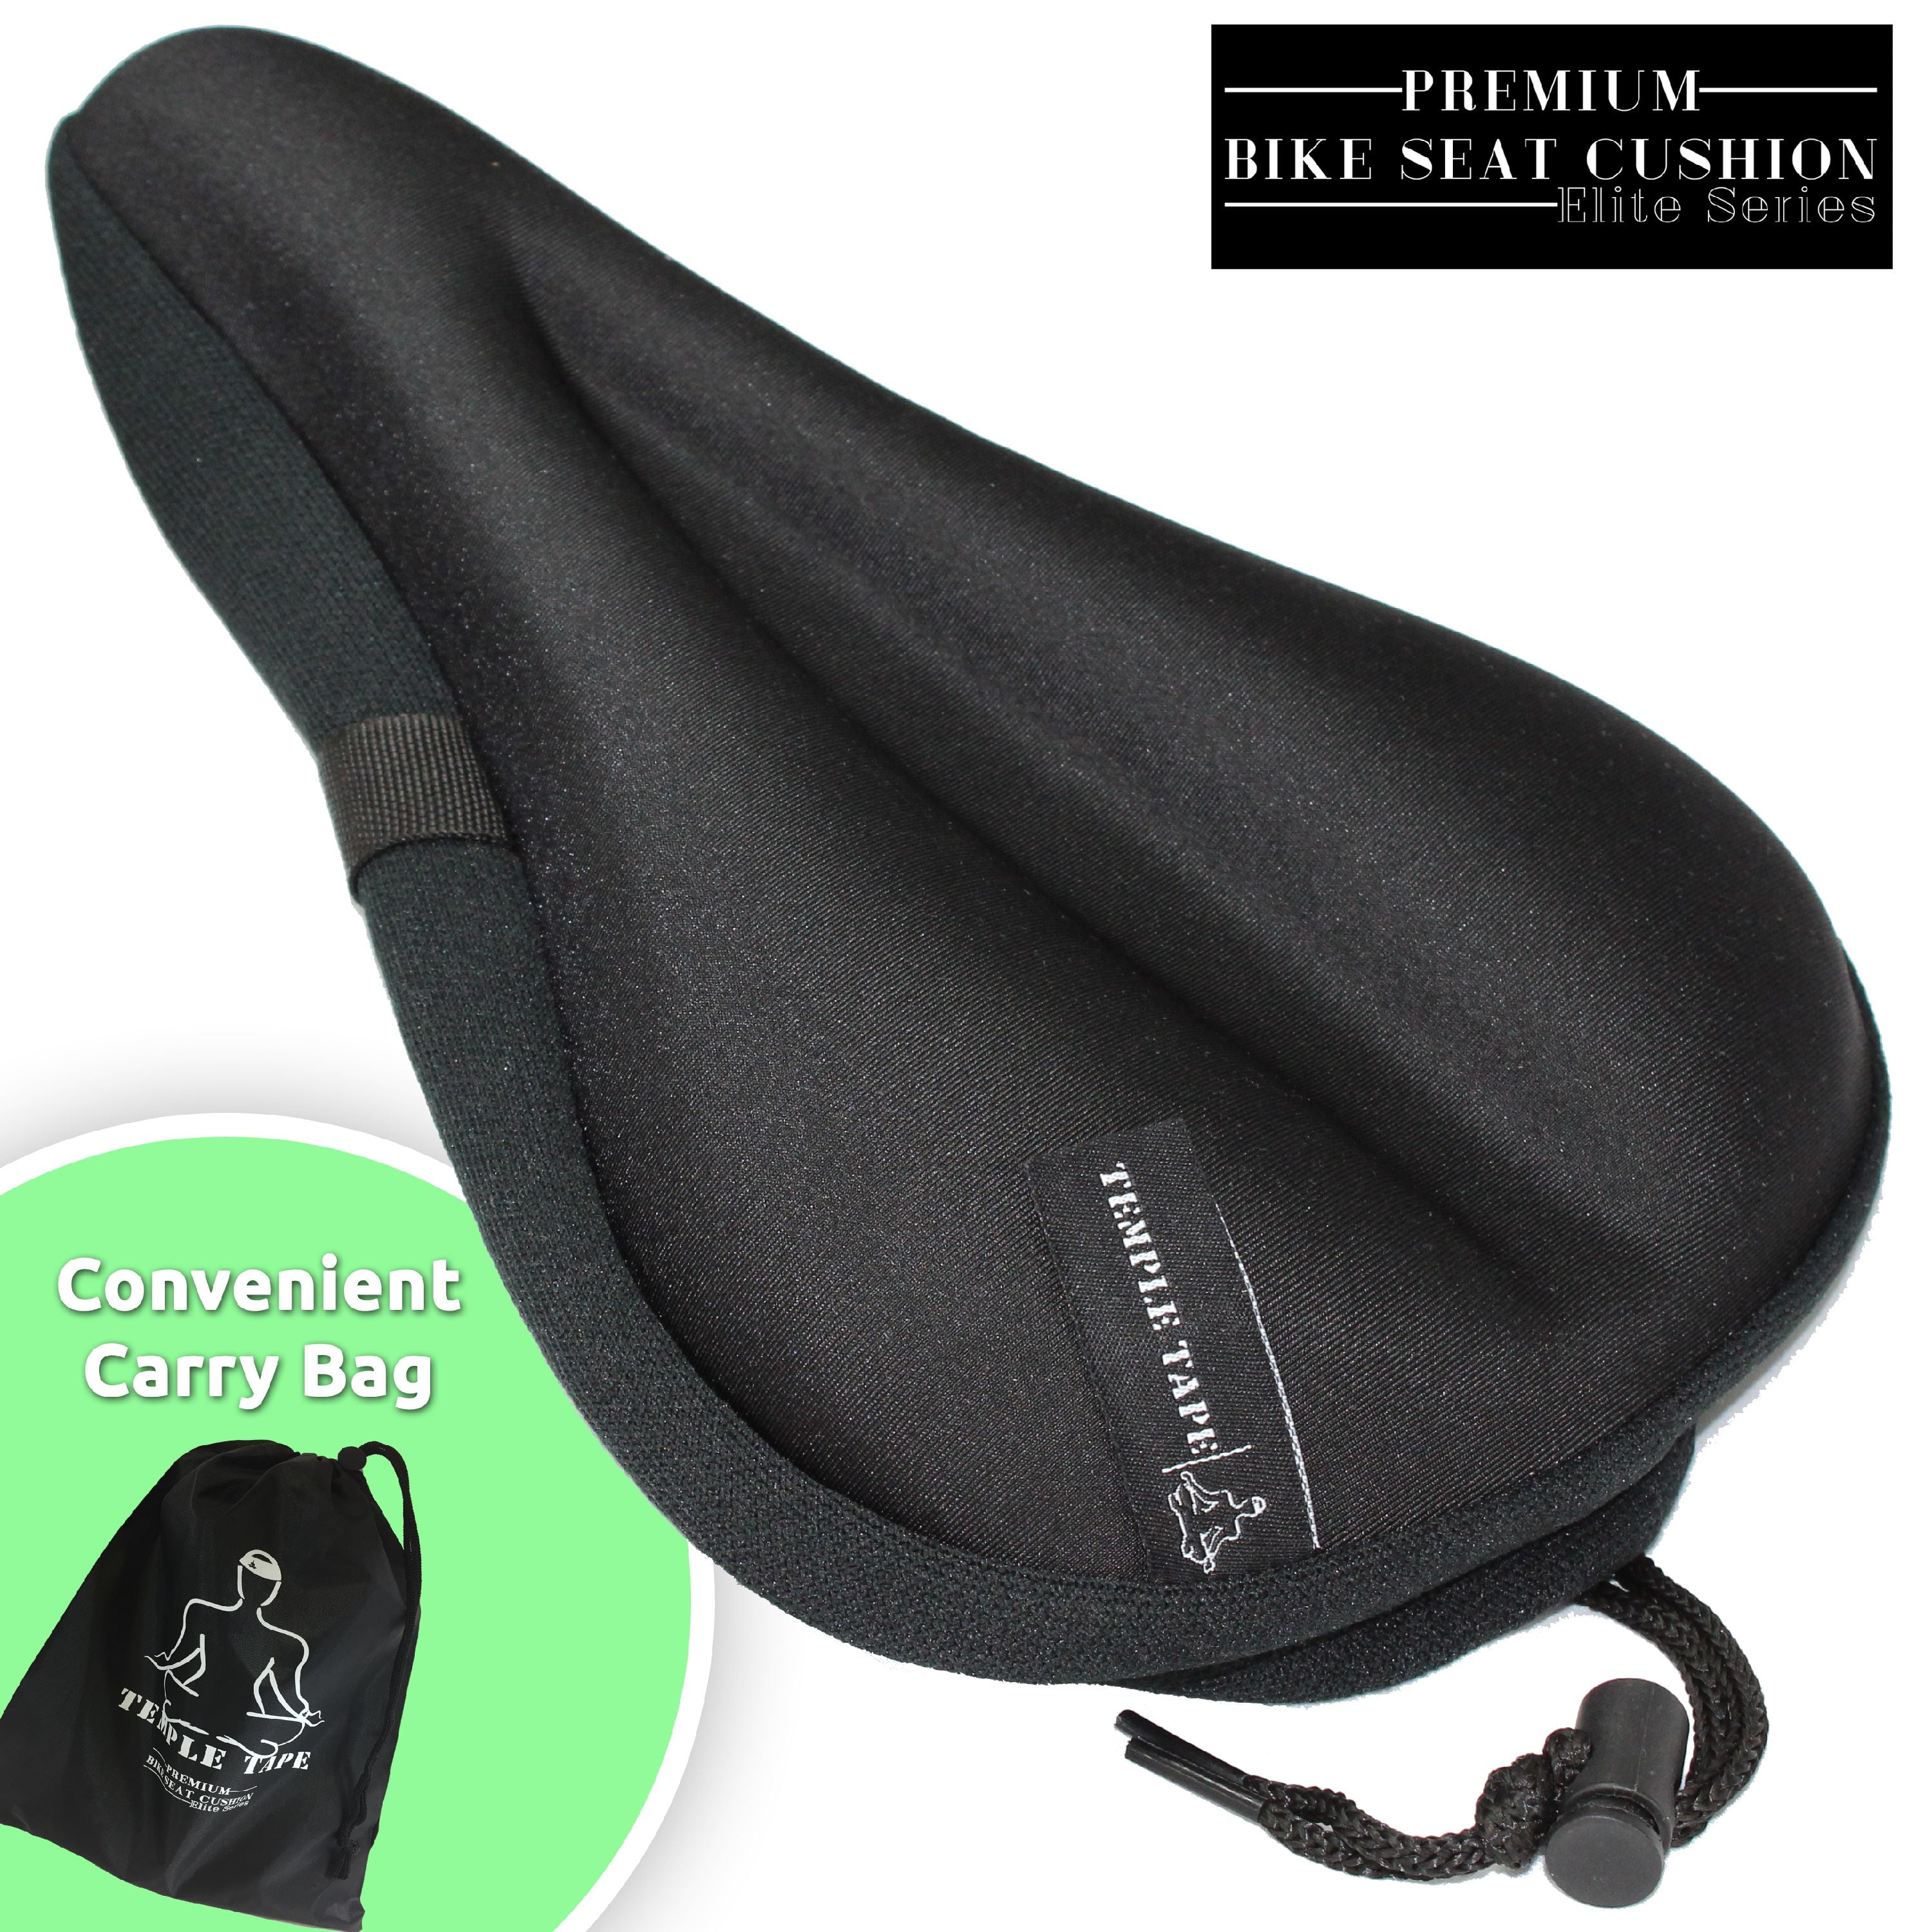 Details about   US Cycling Bike Saddle Soft Cushion Bicycle Seat Cover Comfort Riding Breathable 